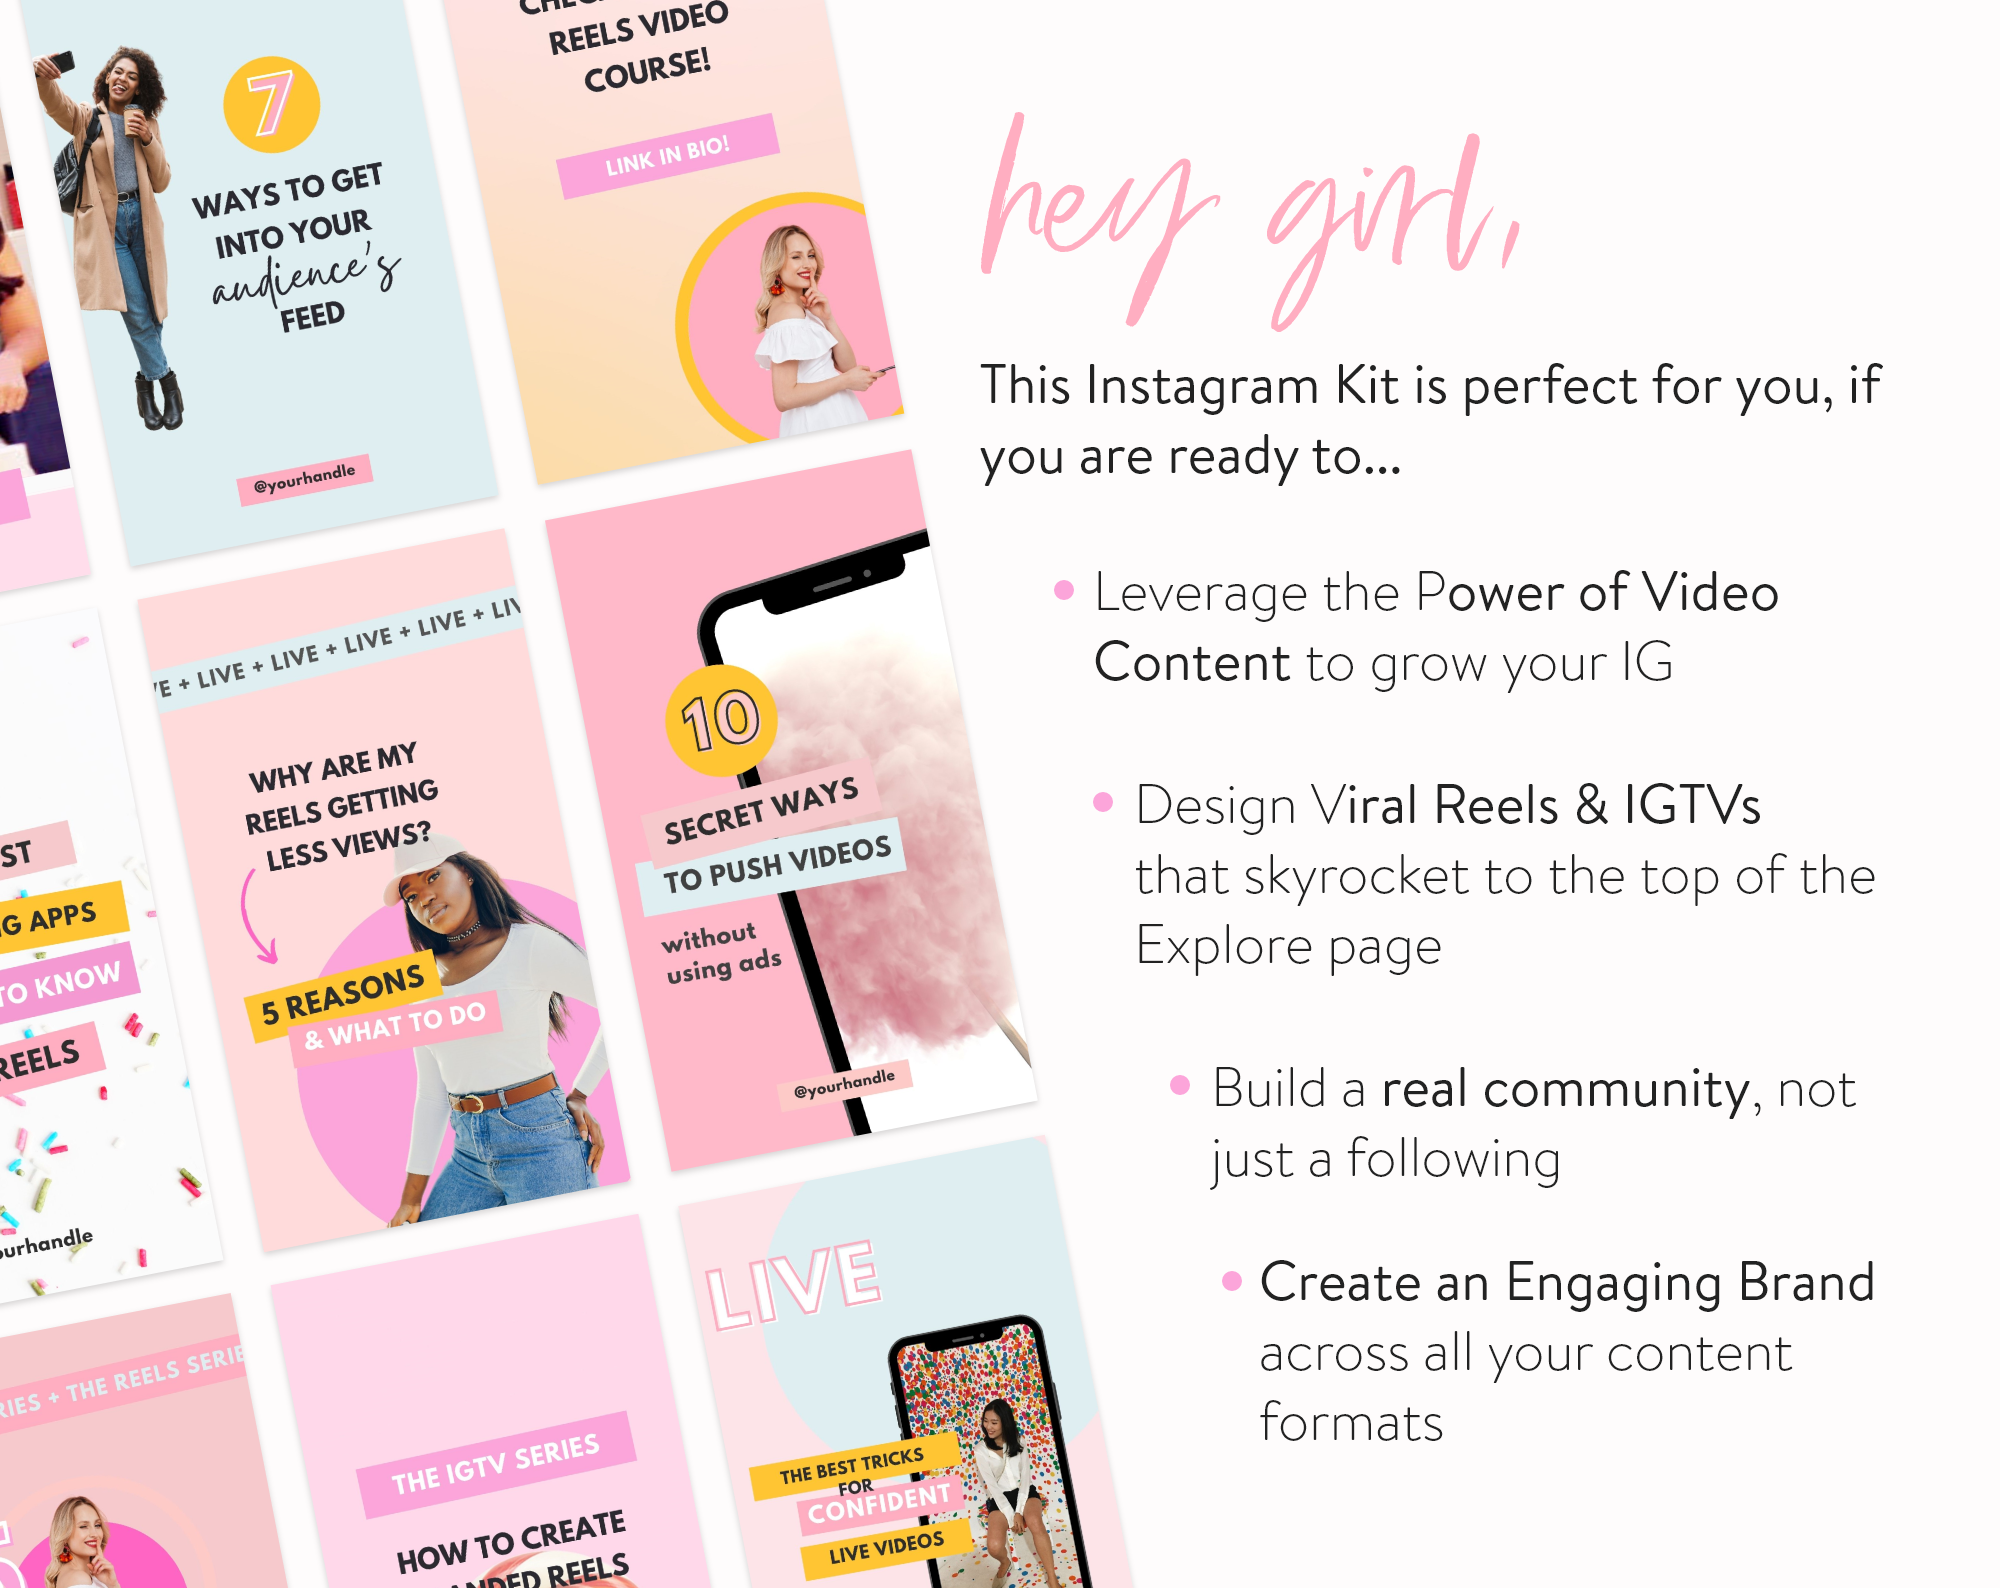 video-reels-igtv-instagram-template-kit-who-is-it-for